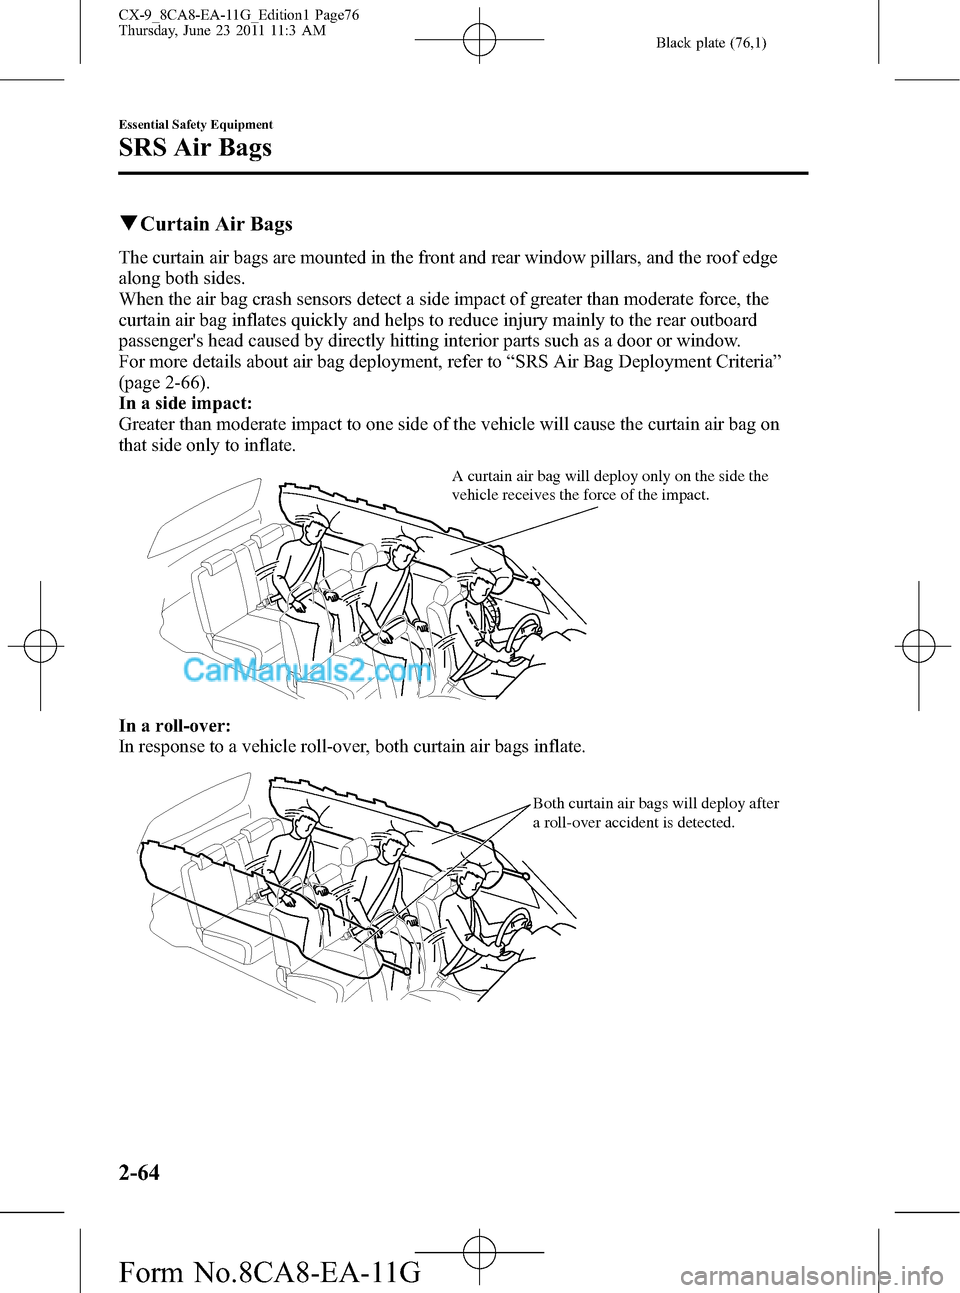 MAZDA MODEL CX-9 2012  Owners Manual (in English) Black plate (76,1)
qCurtain Air Bags
The curtain air bags are mounted in the front and rear window pillars, and the roof edge
along both sides.
When the air bag crash sensors detect a side impact of g